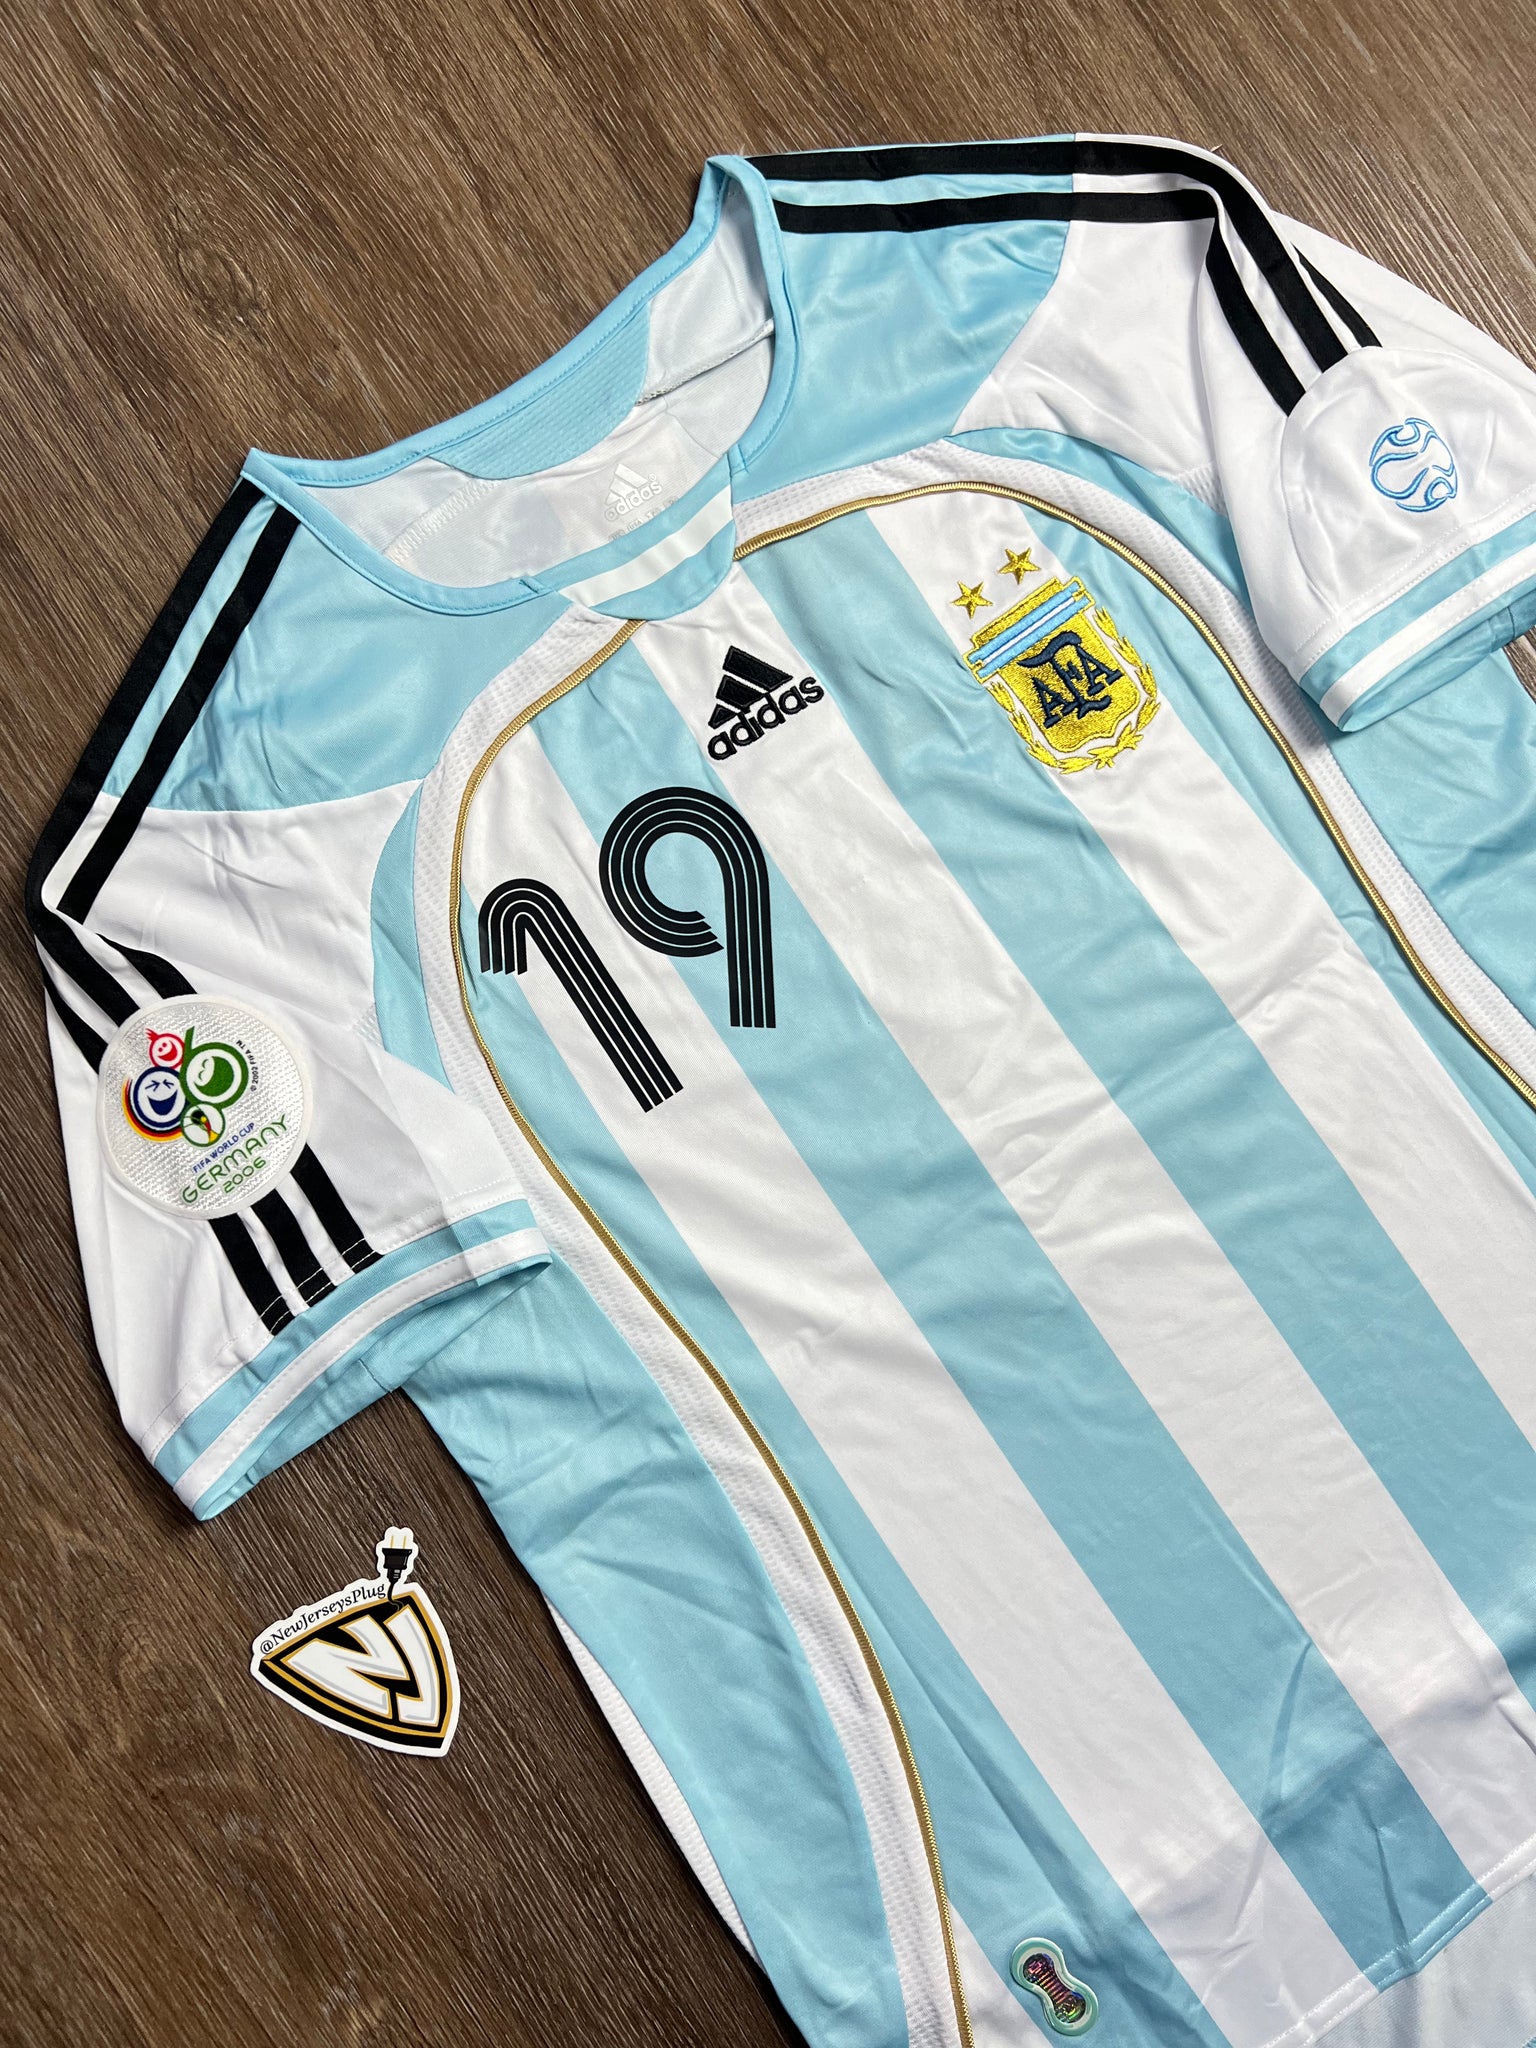 Retro Argentina Home Jersey 2006 By Adidas | Argentina